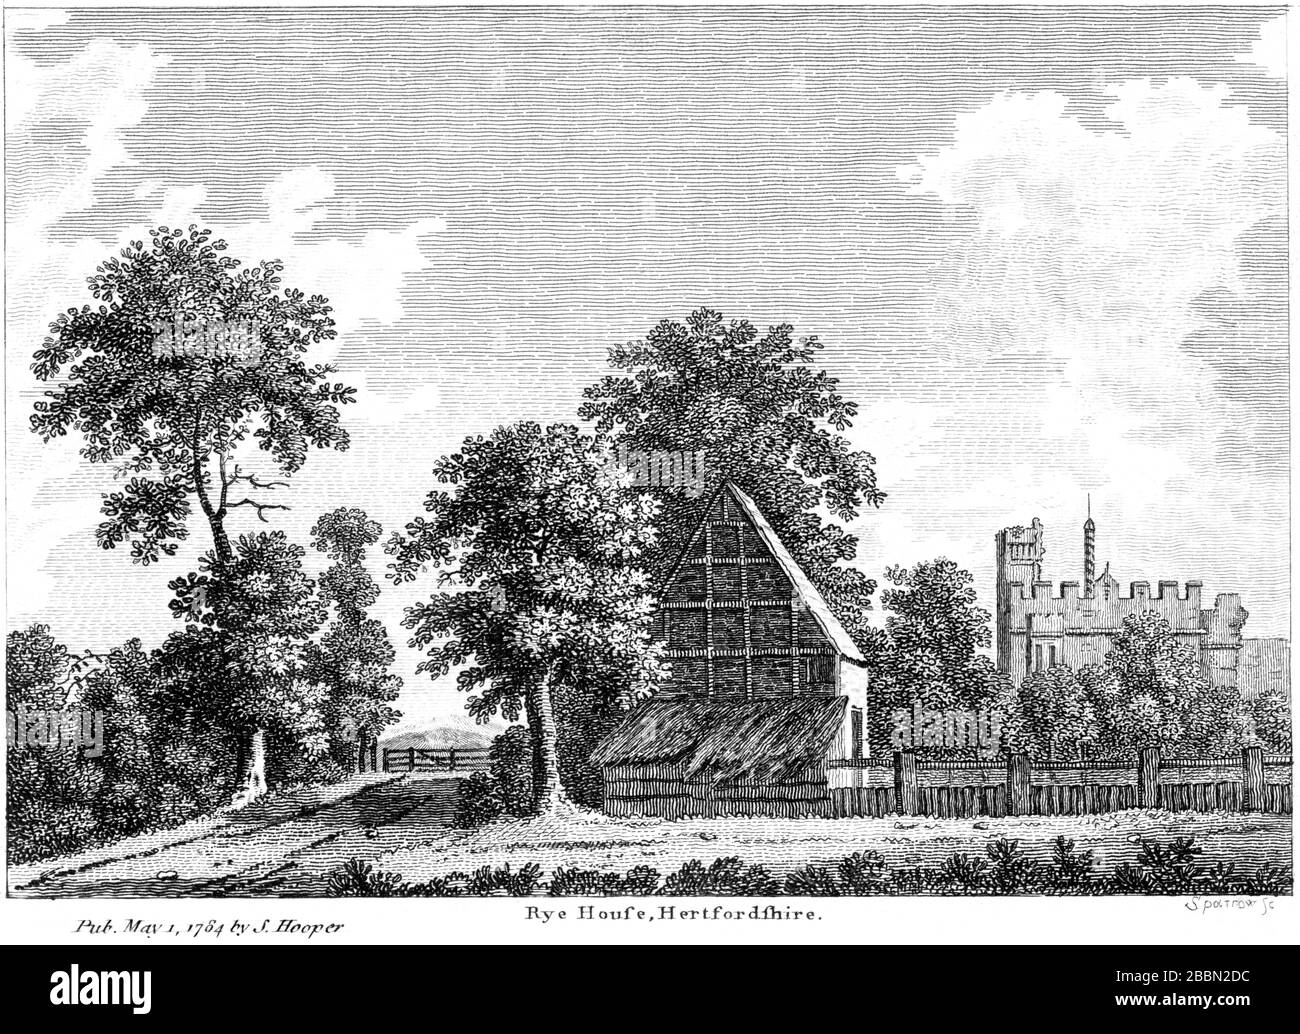 An engraving of Rye House, Hertfordshire 1784 scanned at high resolution from a book published around 1786. Believed copyright free. Stock Photo